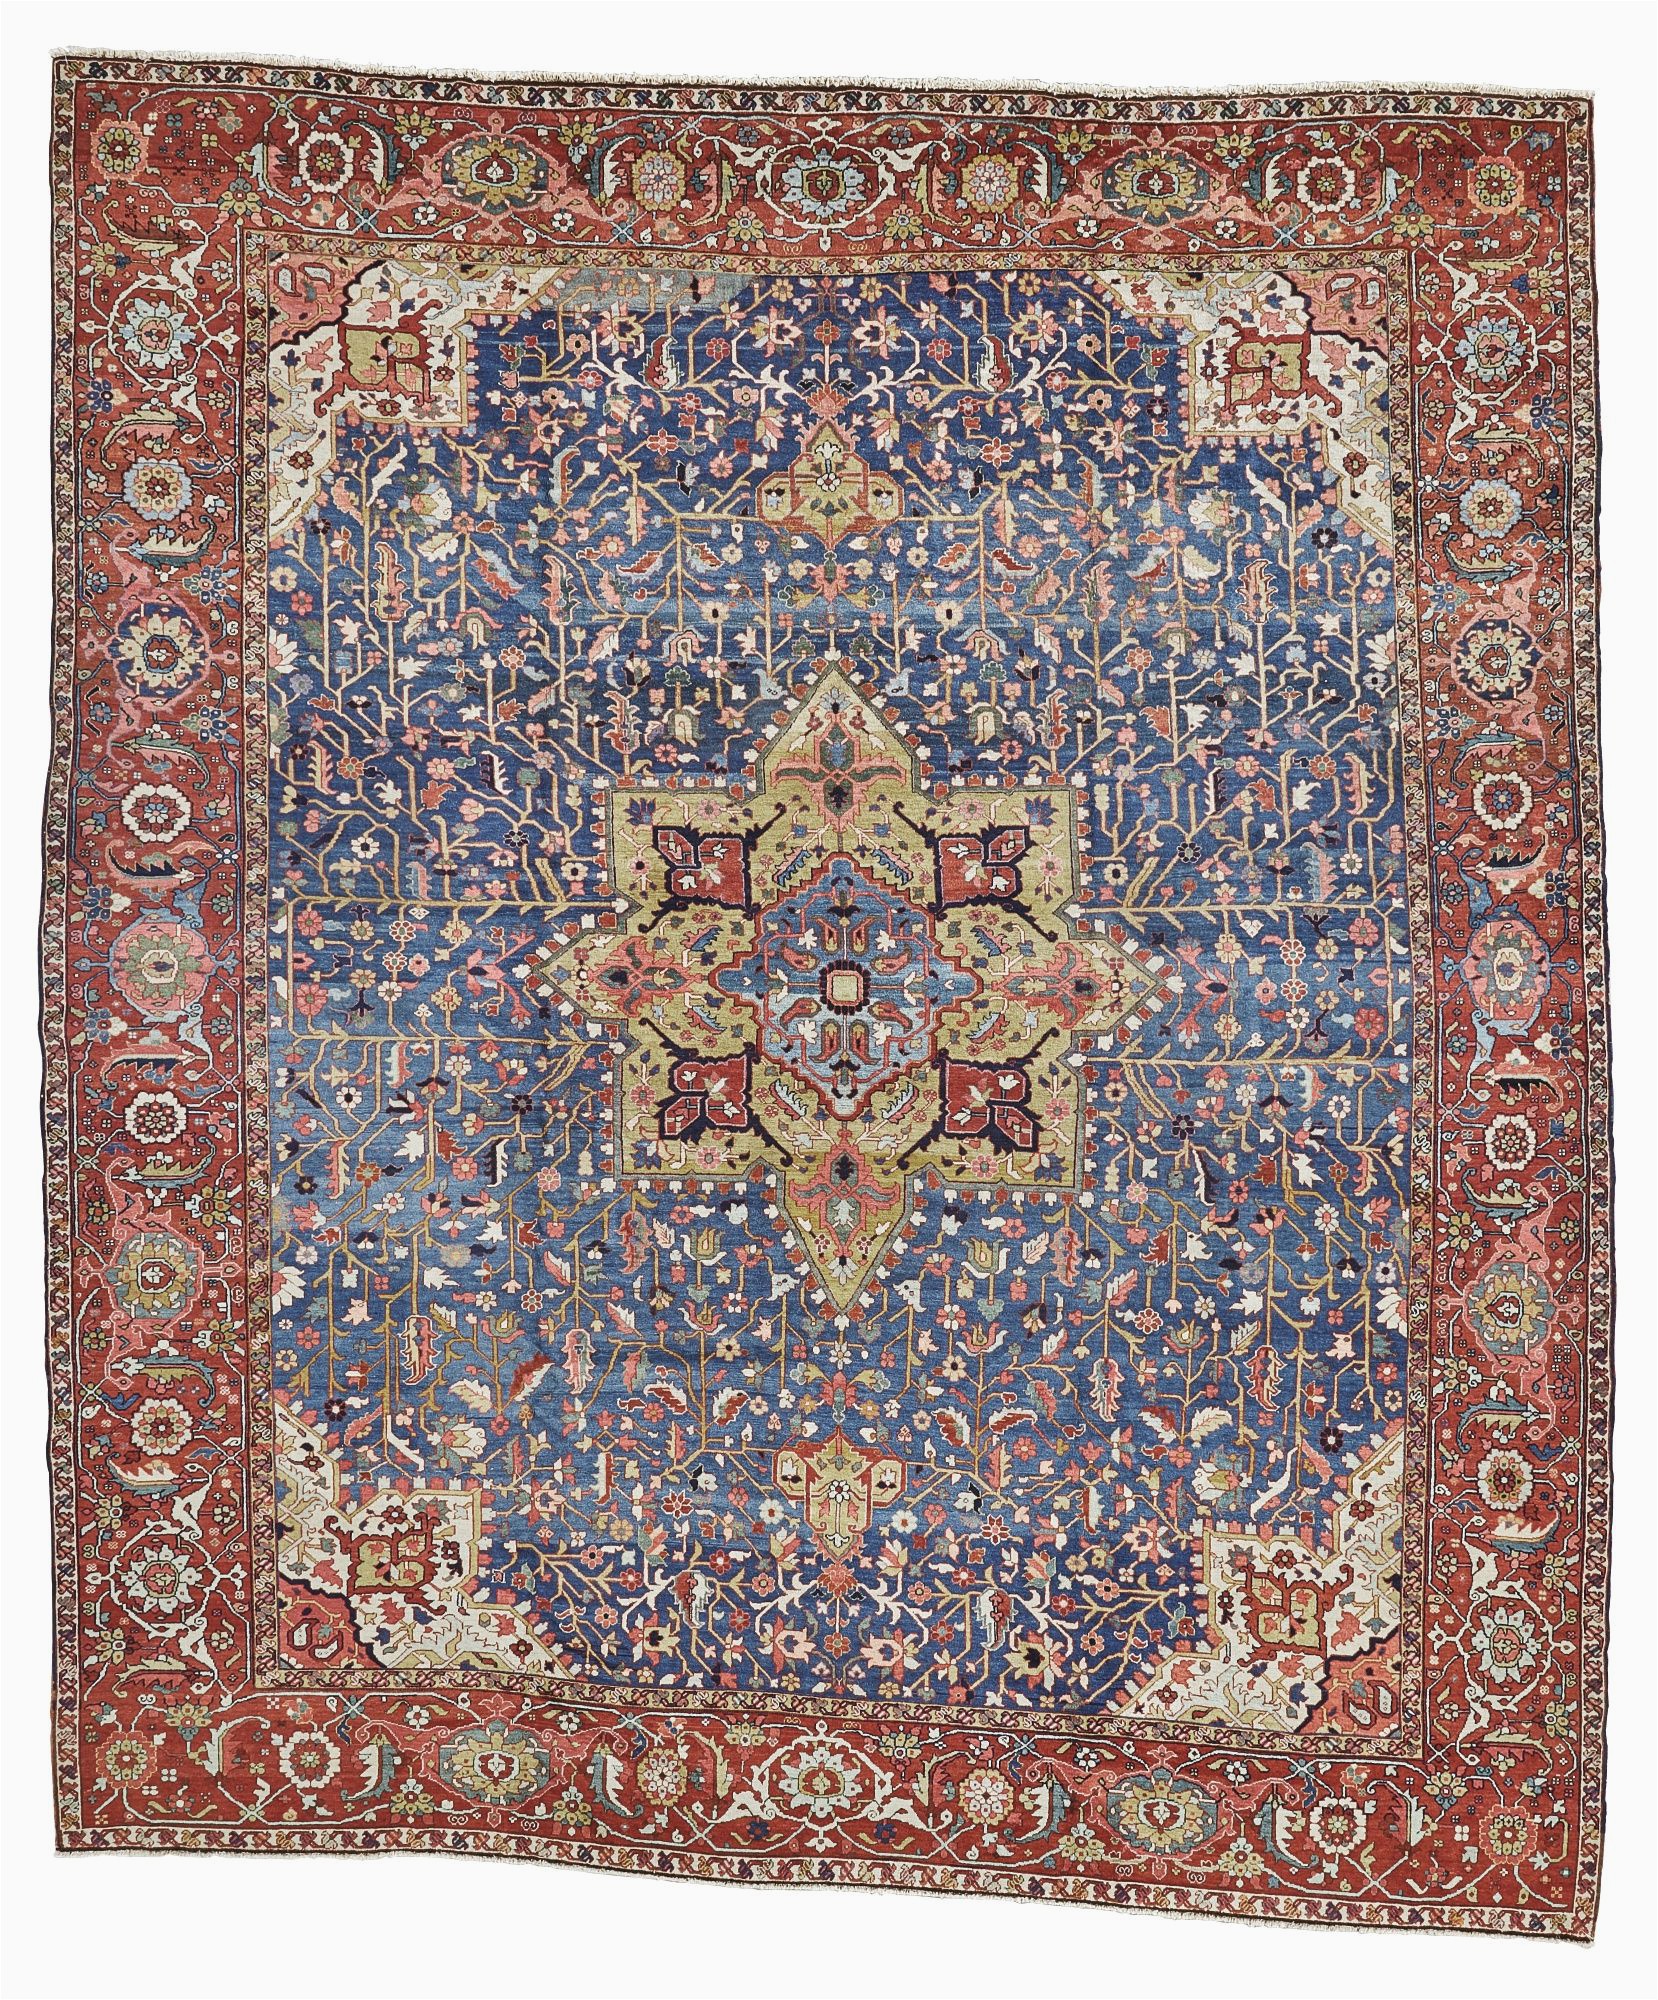 10ft by 12ft area Rugs Heriz Carpet northwest Persia Approximately 377 by 319cm